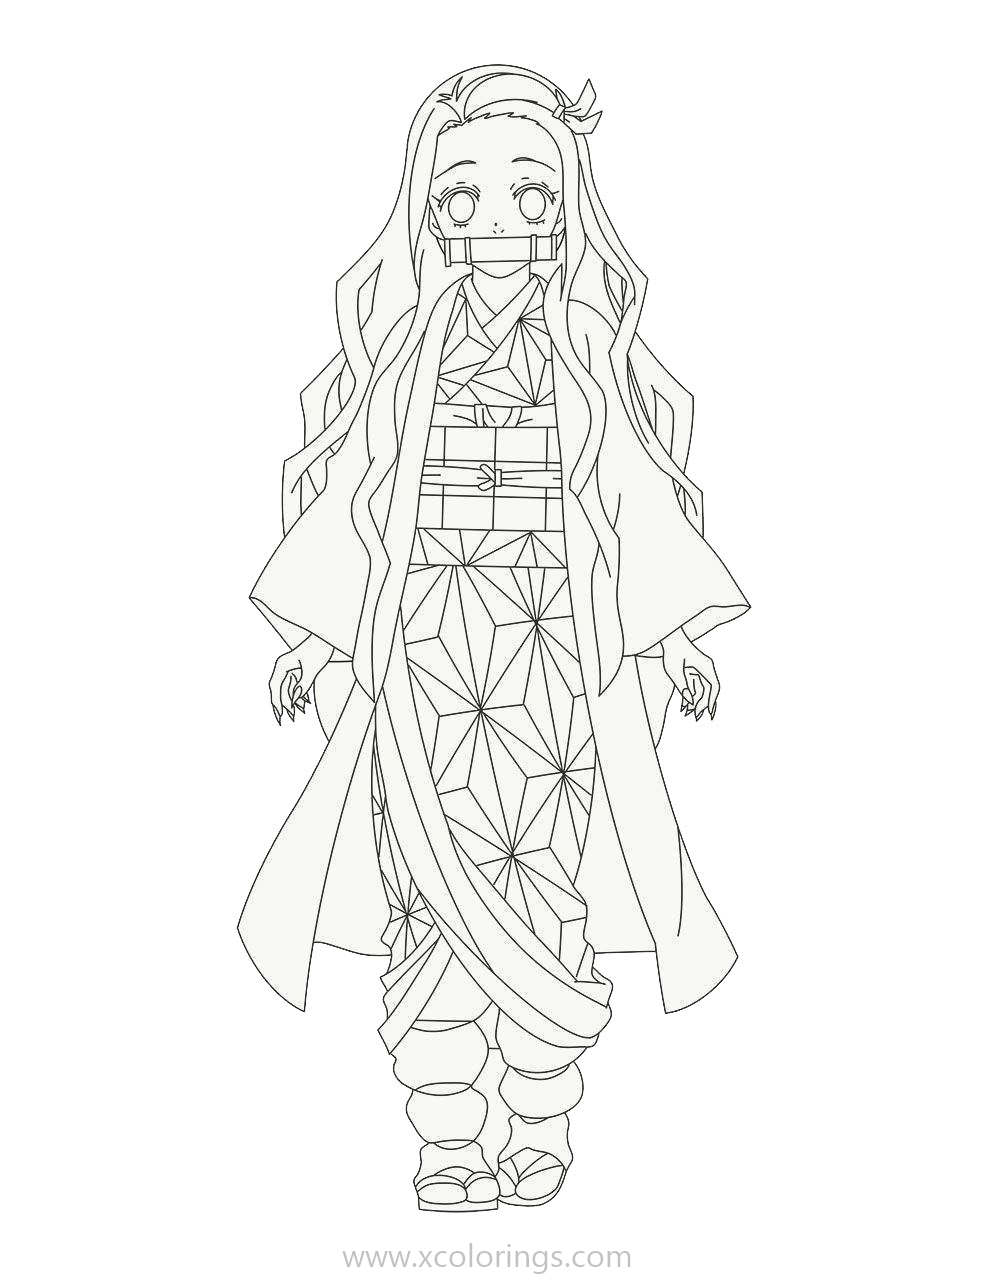 Free Demon Slayer Coloring Pages Nezuko with Japanese Traditional Clothes printable